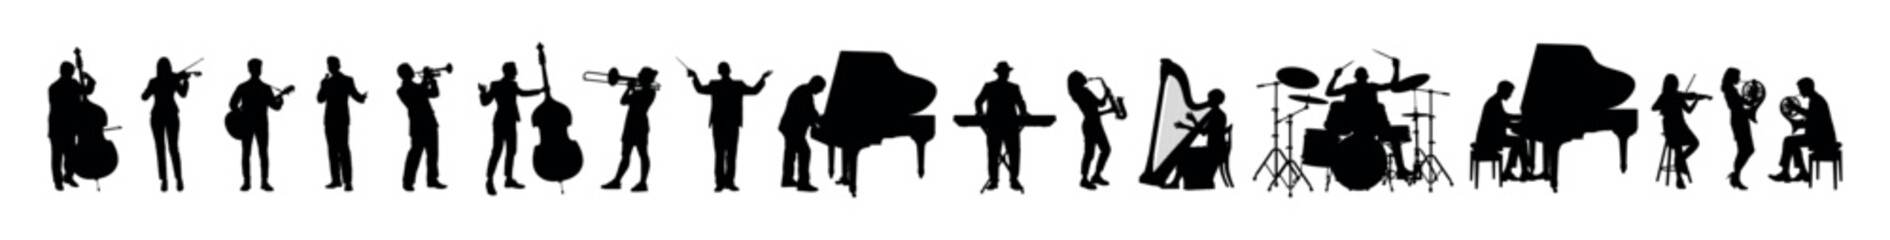 Large group  silhouettes set of musicians playing various musical instruments flat vector collection. Band musicians playing instruments together concert show silhouette.